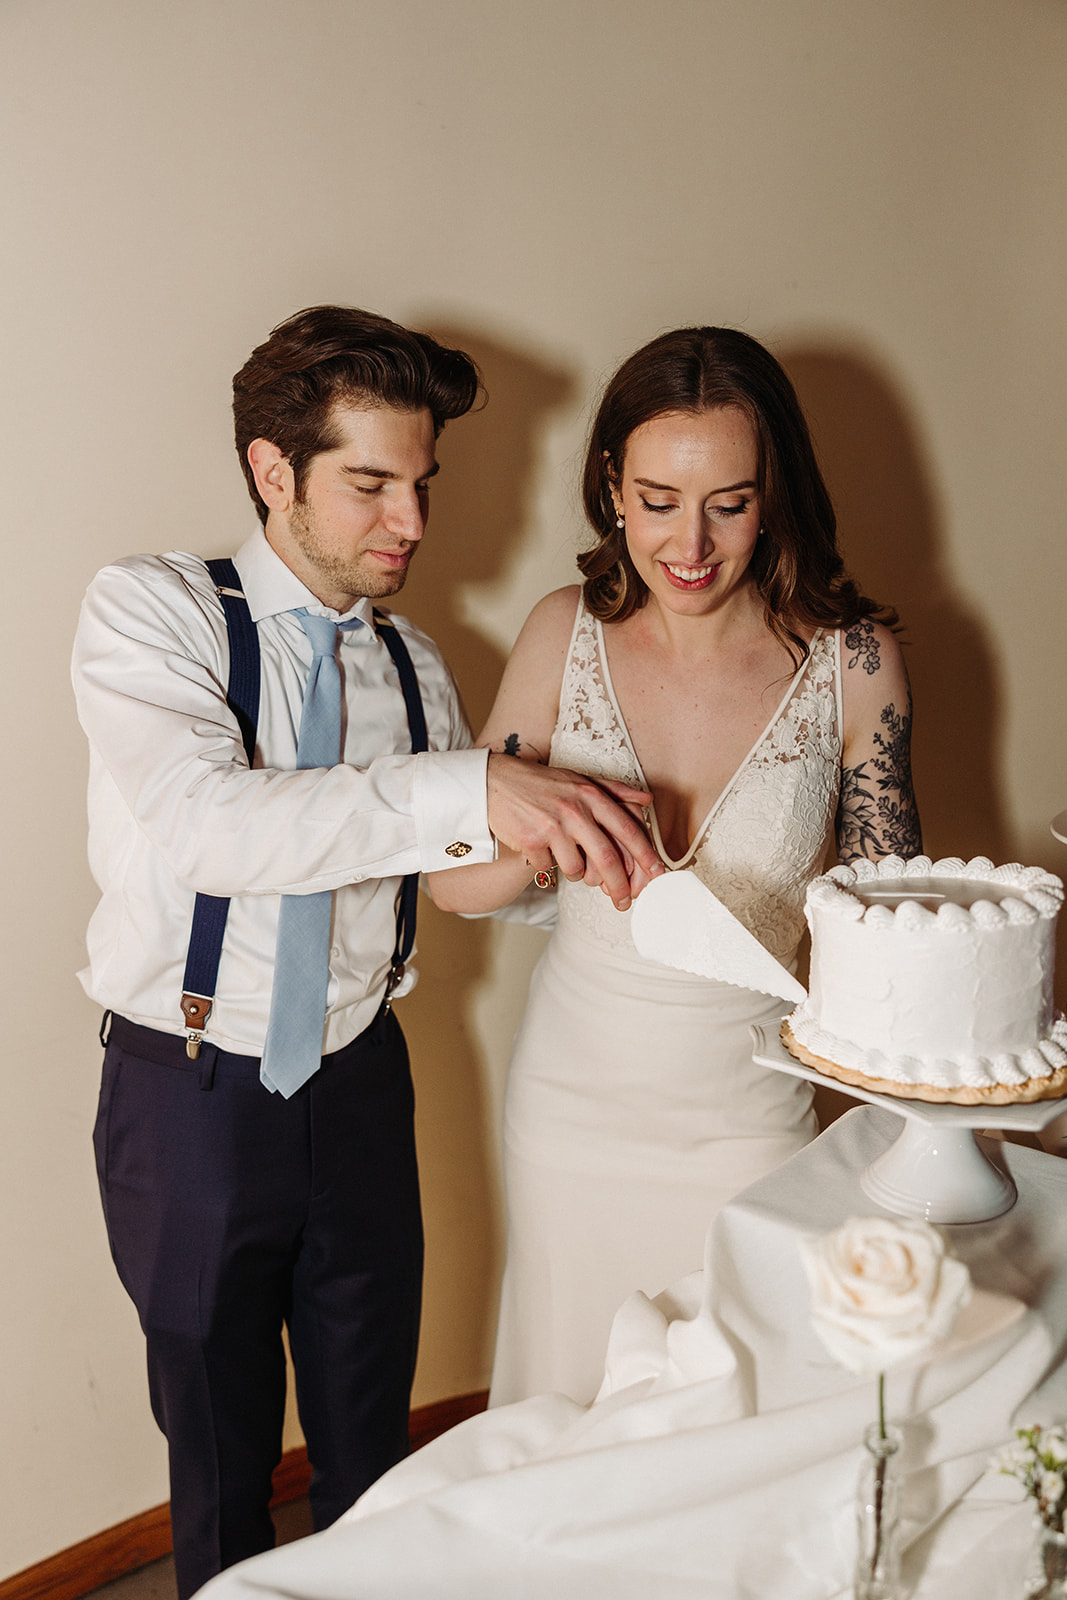 Man and woman cutting the wedding cake 